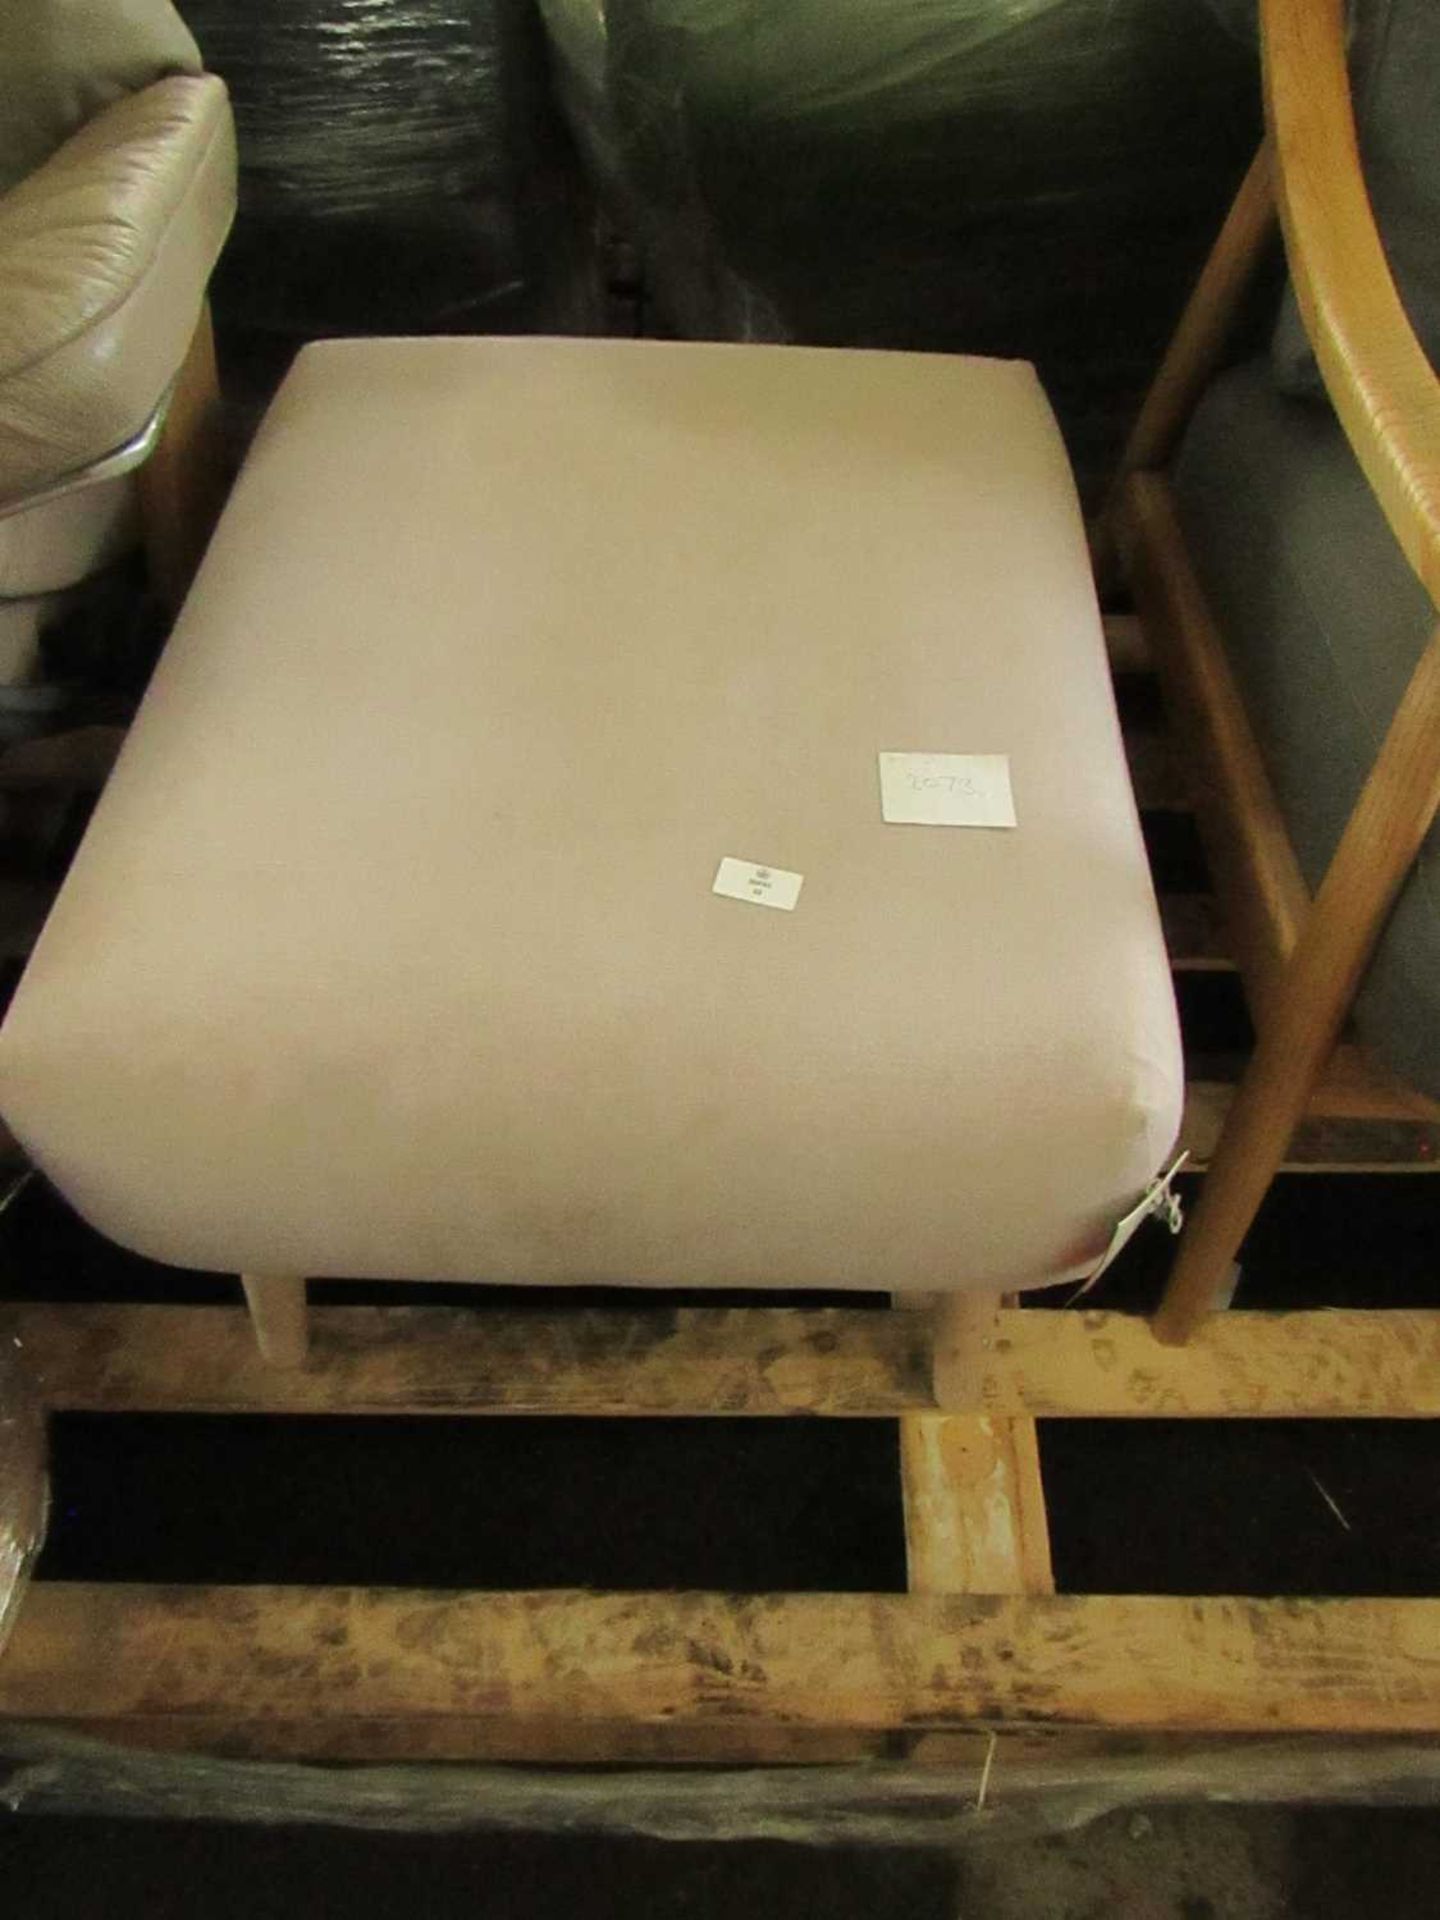 VAT Cox and Cox footstool, has a few dirty marks but other than that appears to be in good